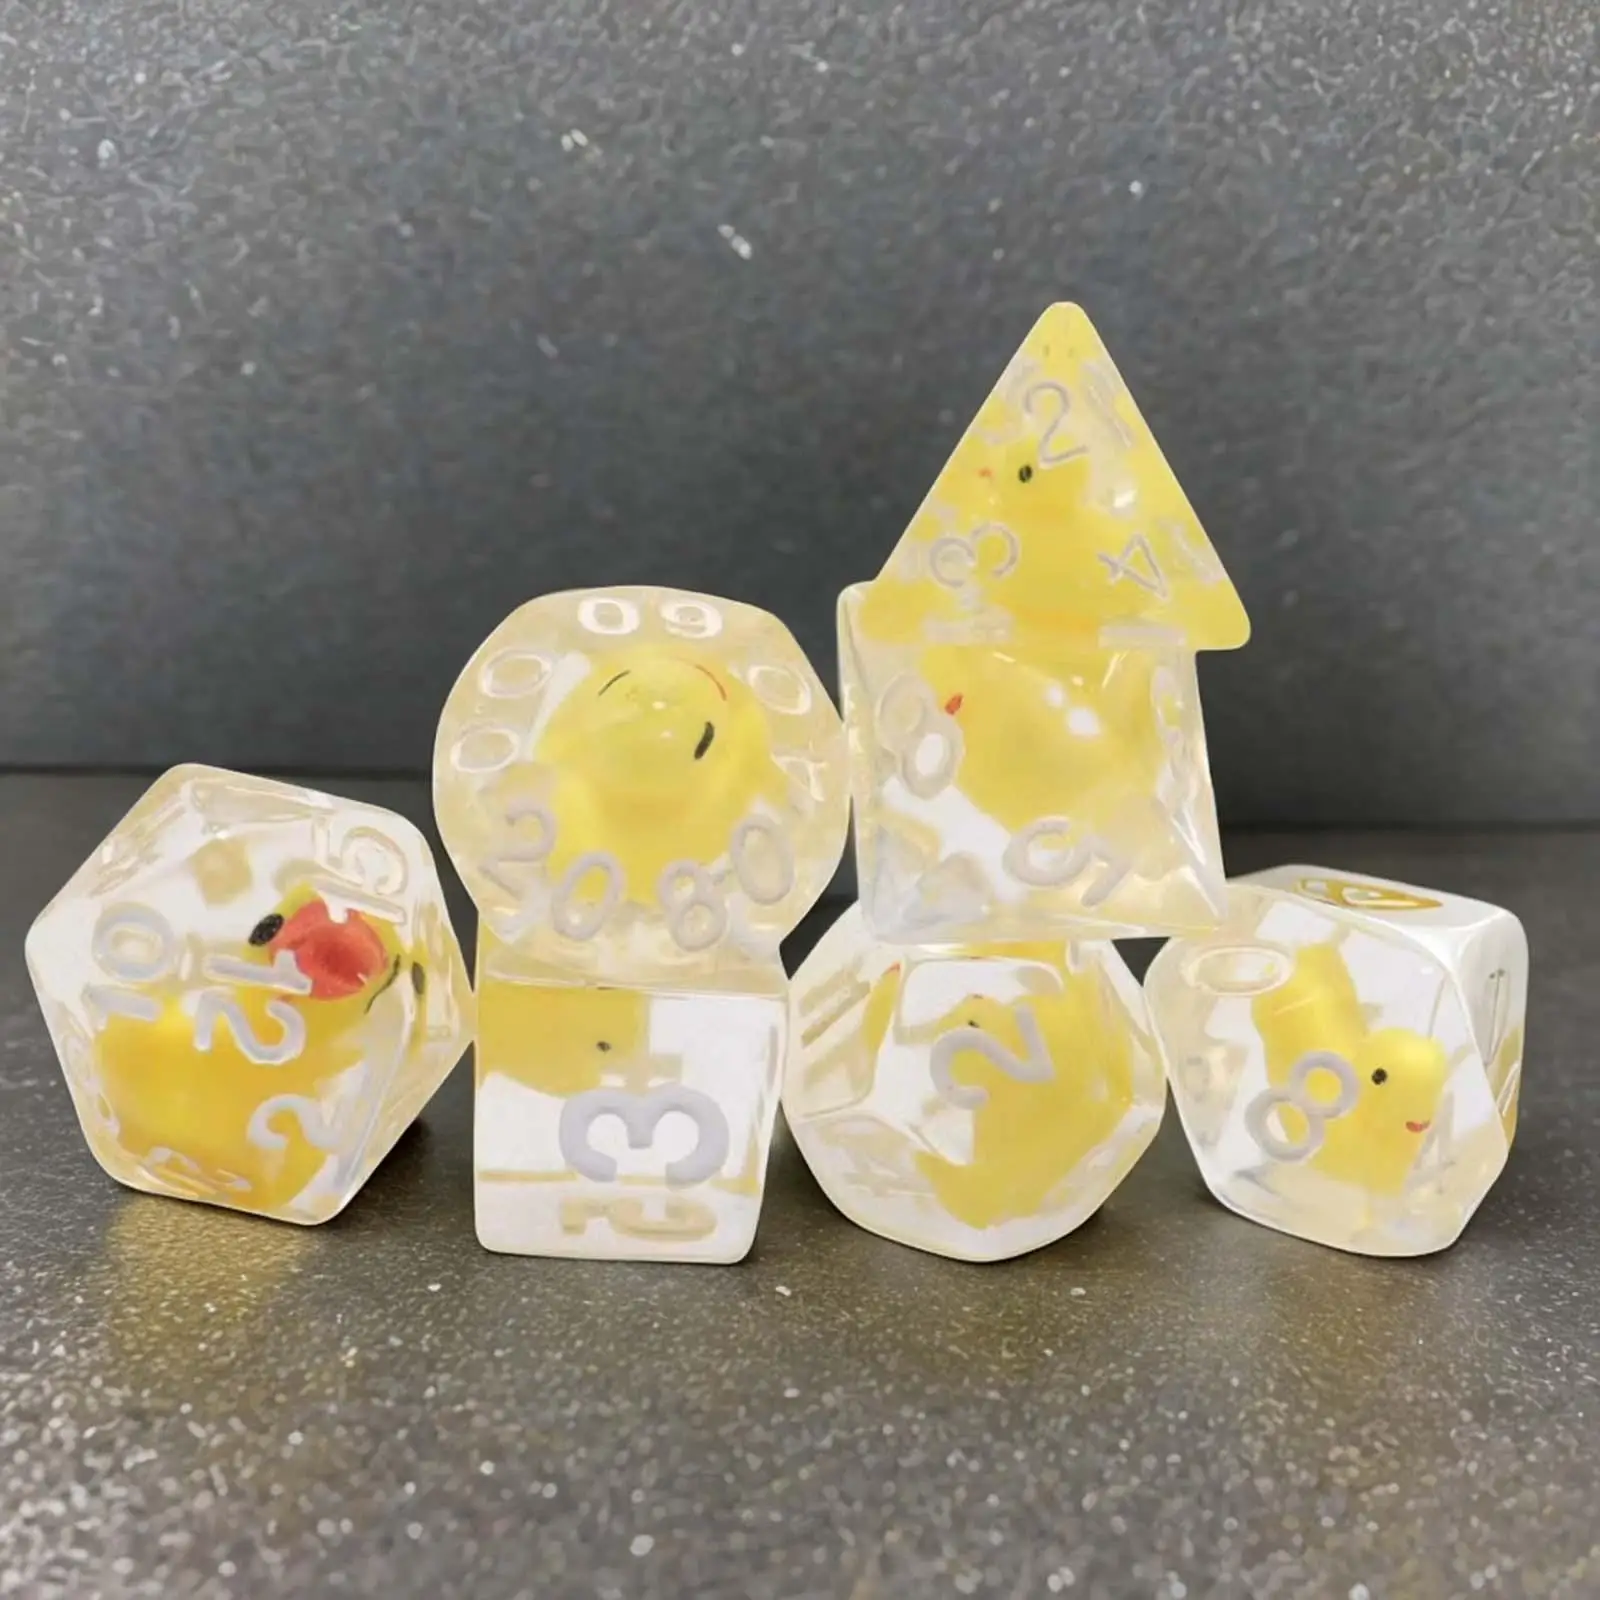 7x Polyhedral Dices Set Party Game Dices D4-d20 Filled with Ducks Animal Playing Dices Acrylic Dices for KTV Party Board Game